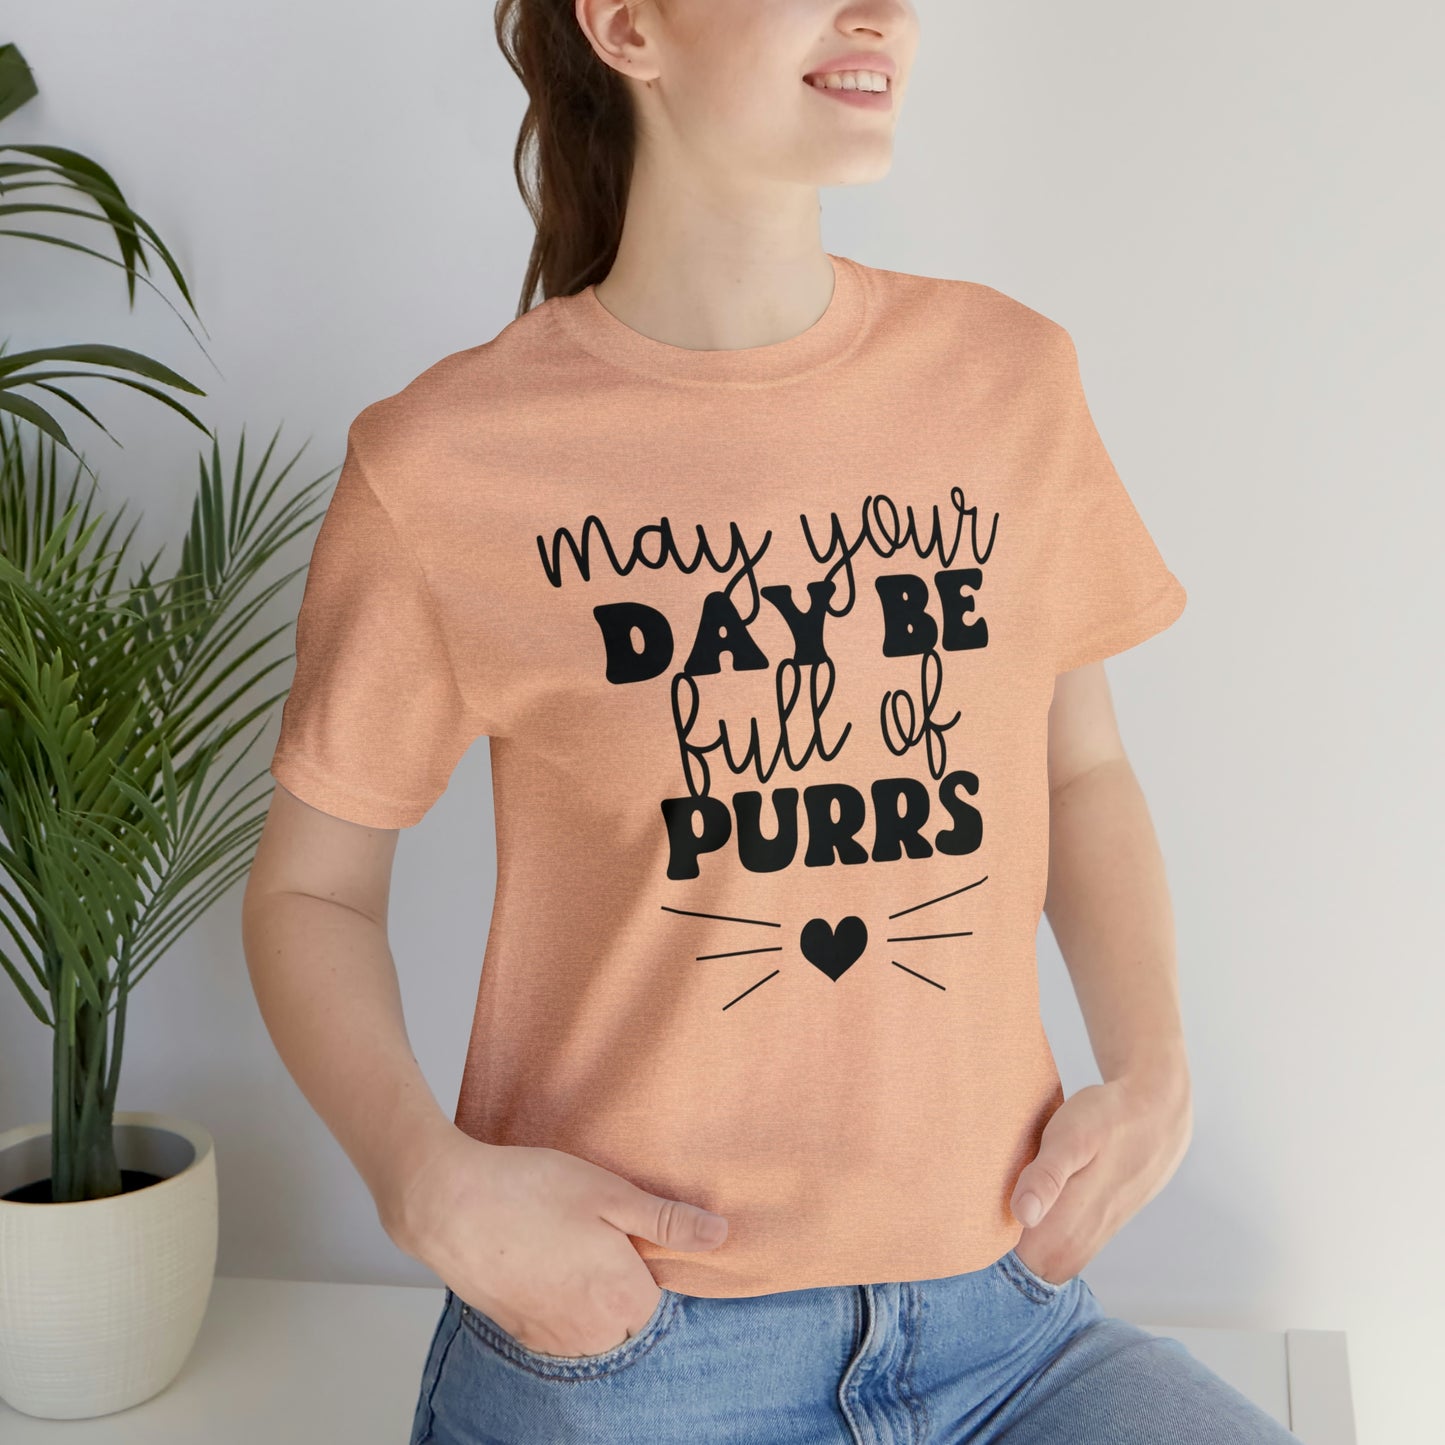 May Your Day Be Full of Purrs Short Sleeve T-shirt